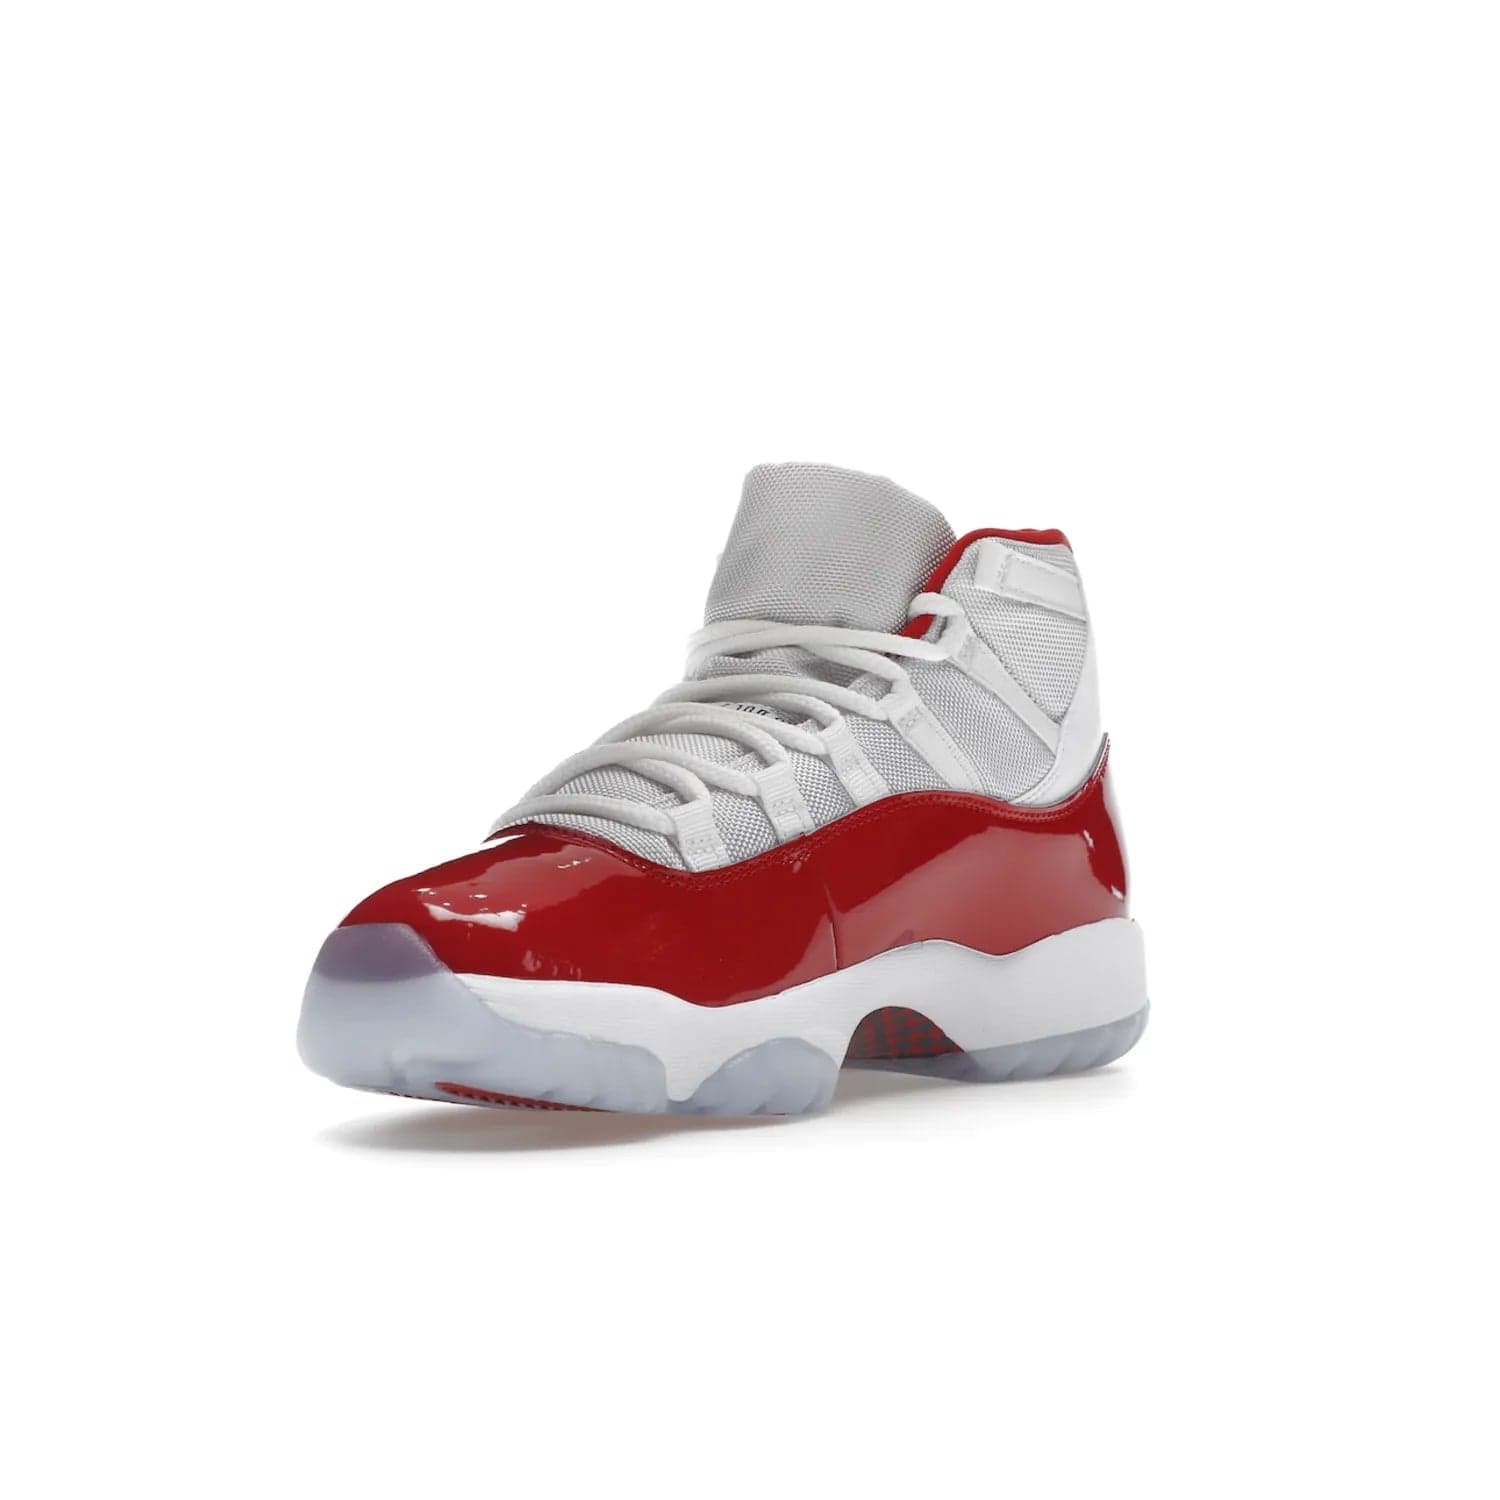 Jordan 11 Retro Cherry (2022) - Image 14 - Only at www.BallersClubKickz.com - The Air Jordan 11 Cherry features classic patent leather with Cherry red accents, icy blue outsole, and debossed 23 on the heel tab. Refresh your sneaker game with this iconic update, available December 10, 2022.